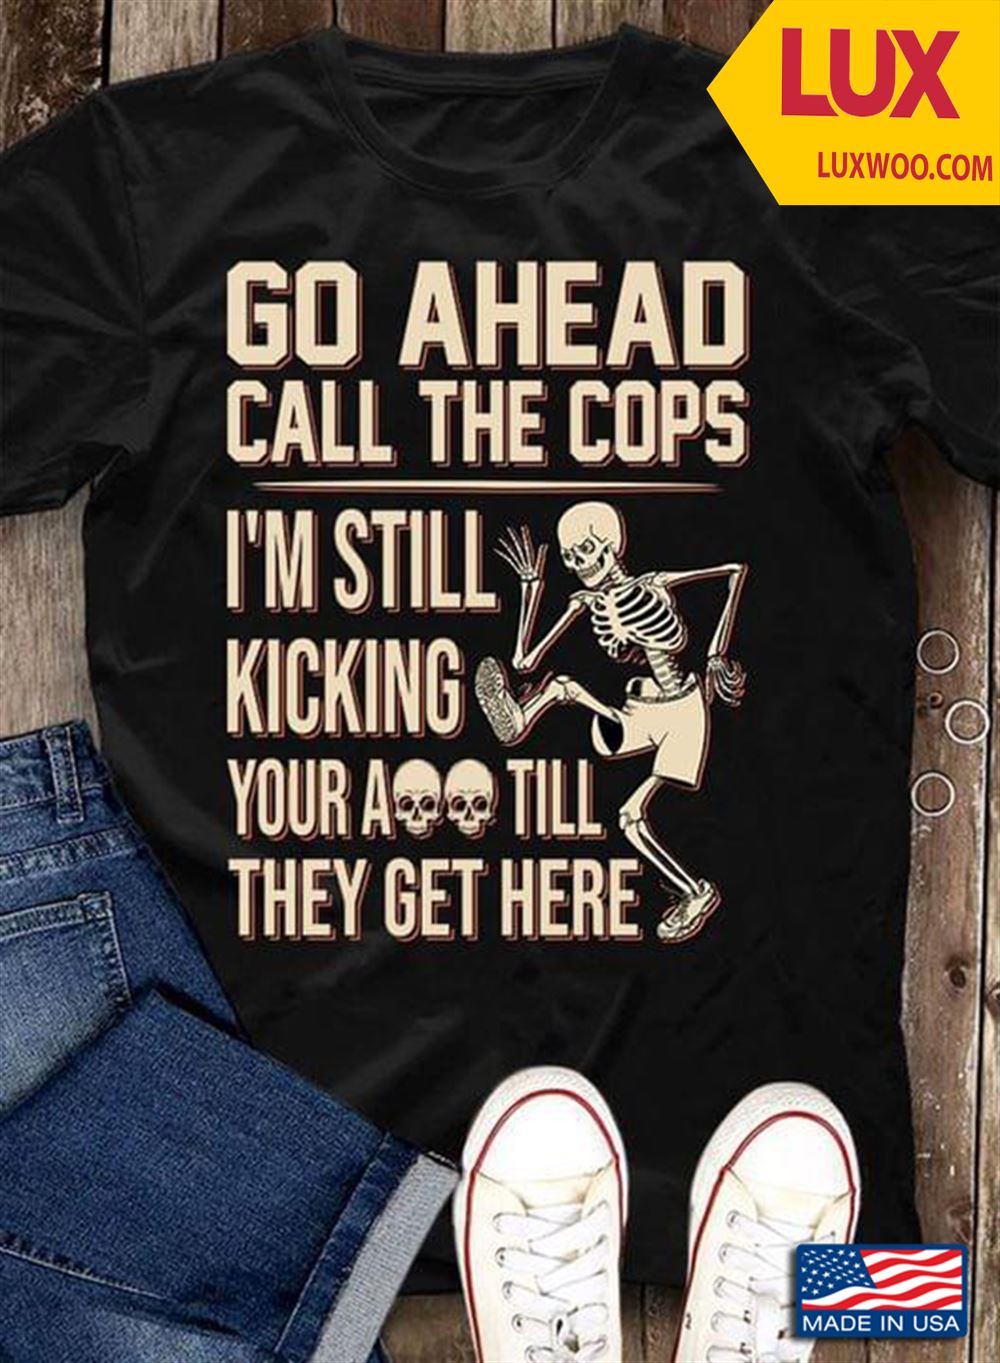 Skeleton Go Ahead Call The Cops Im Still Kicking Your Ass Still They Get Here Shirt Size Up To 5xl